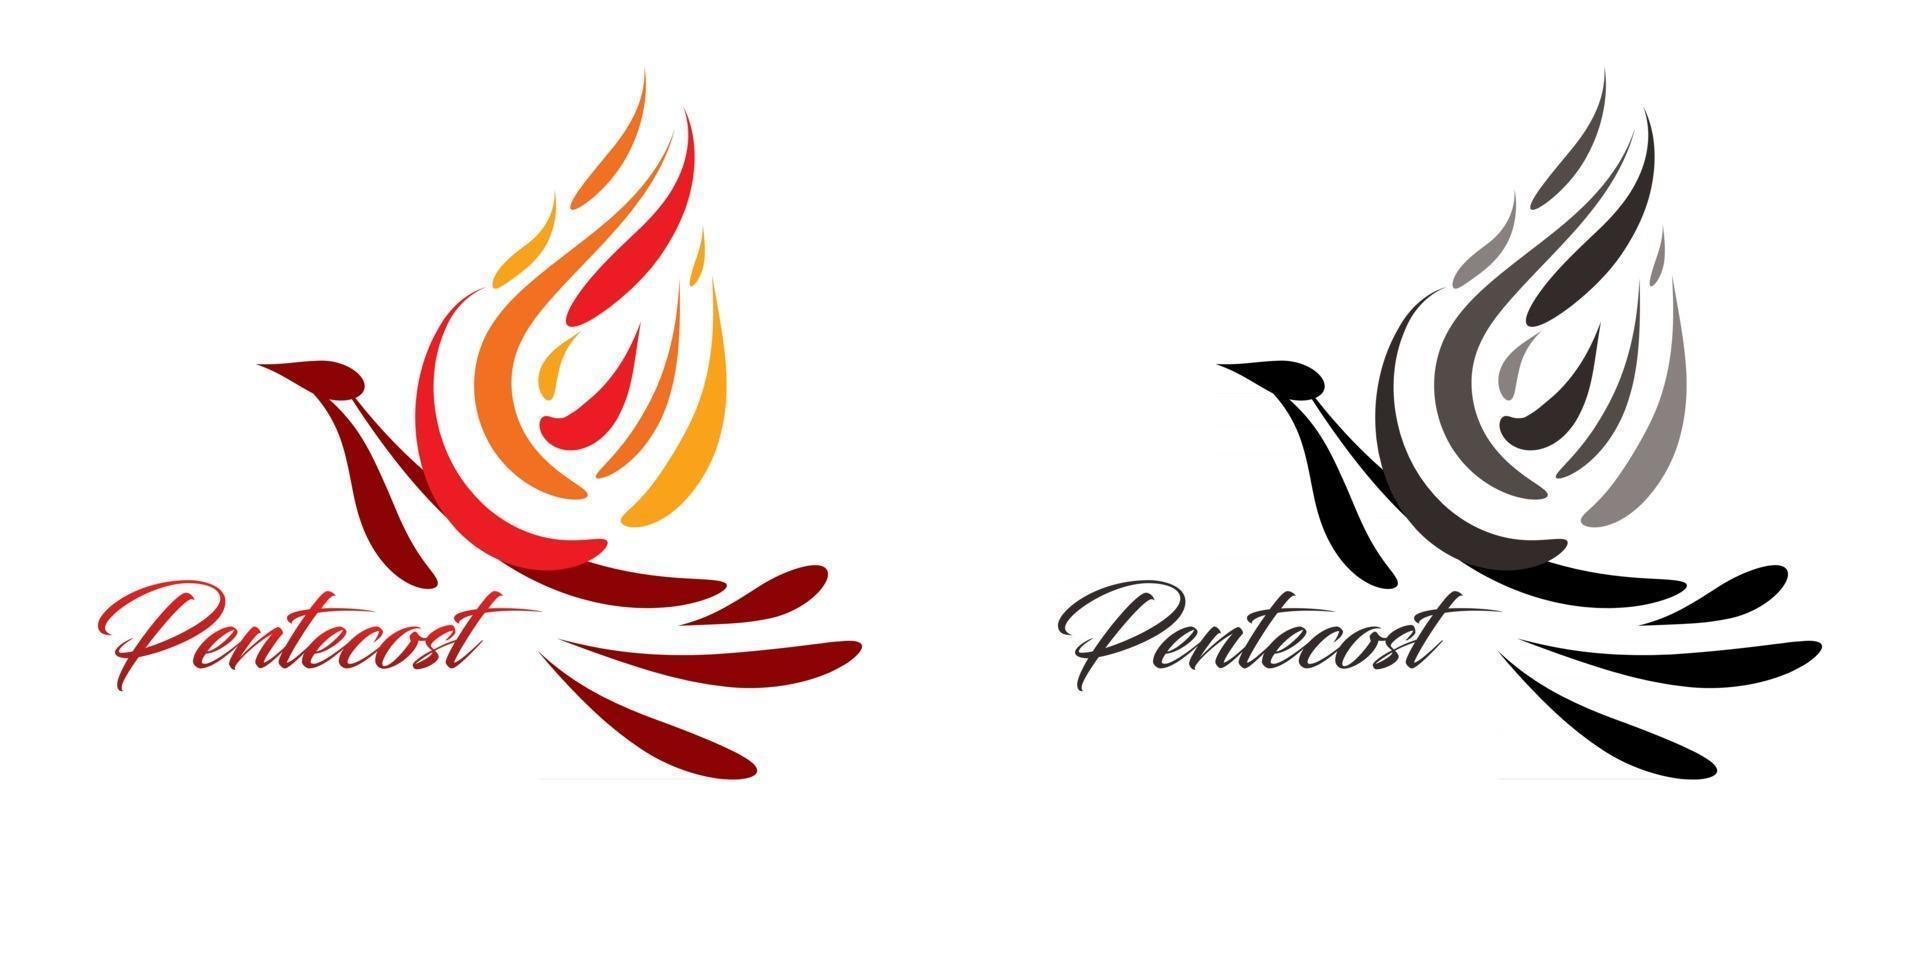 Pentecost Text with Holy Spirit Dove vector